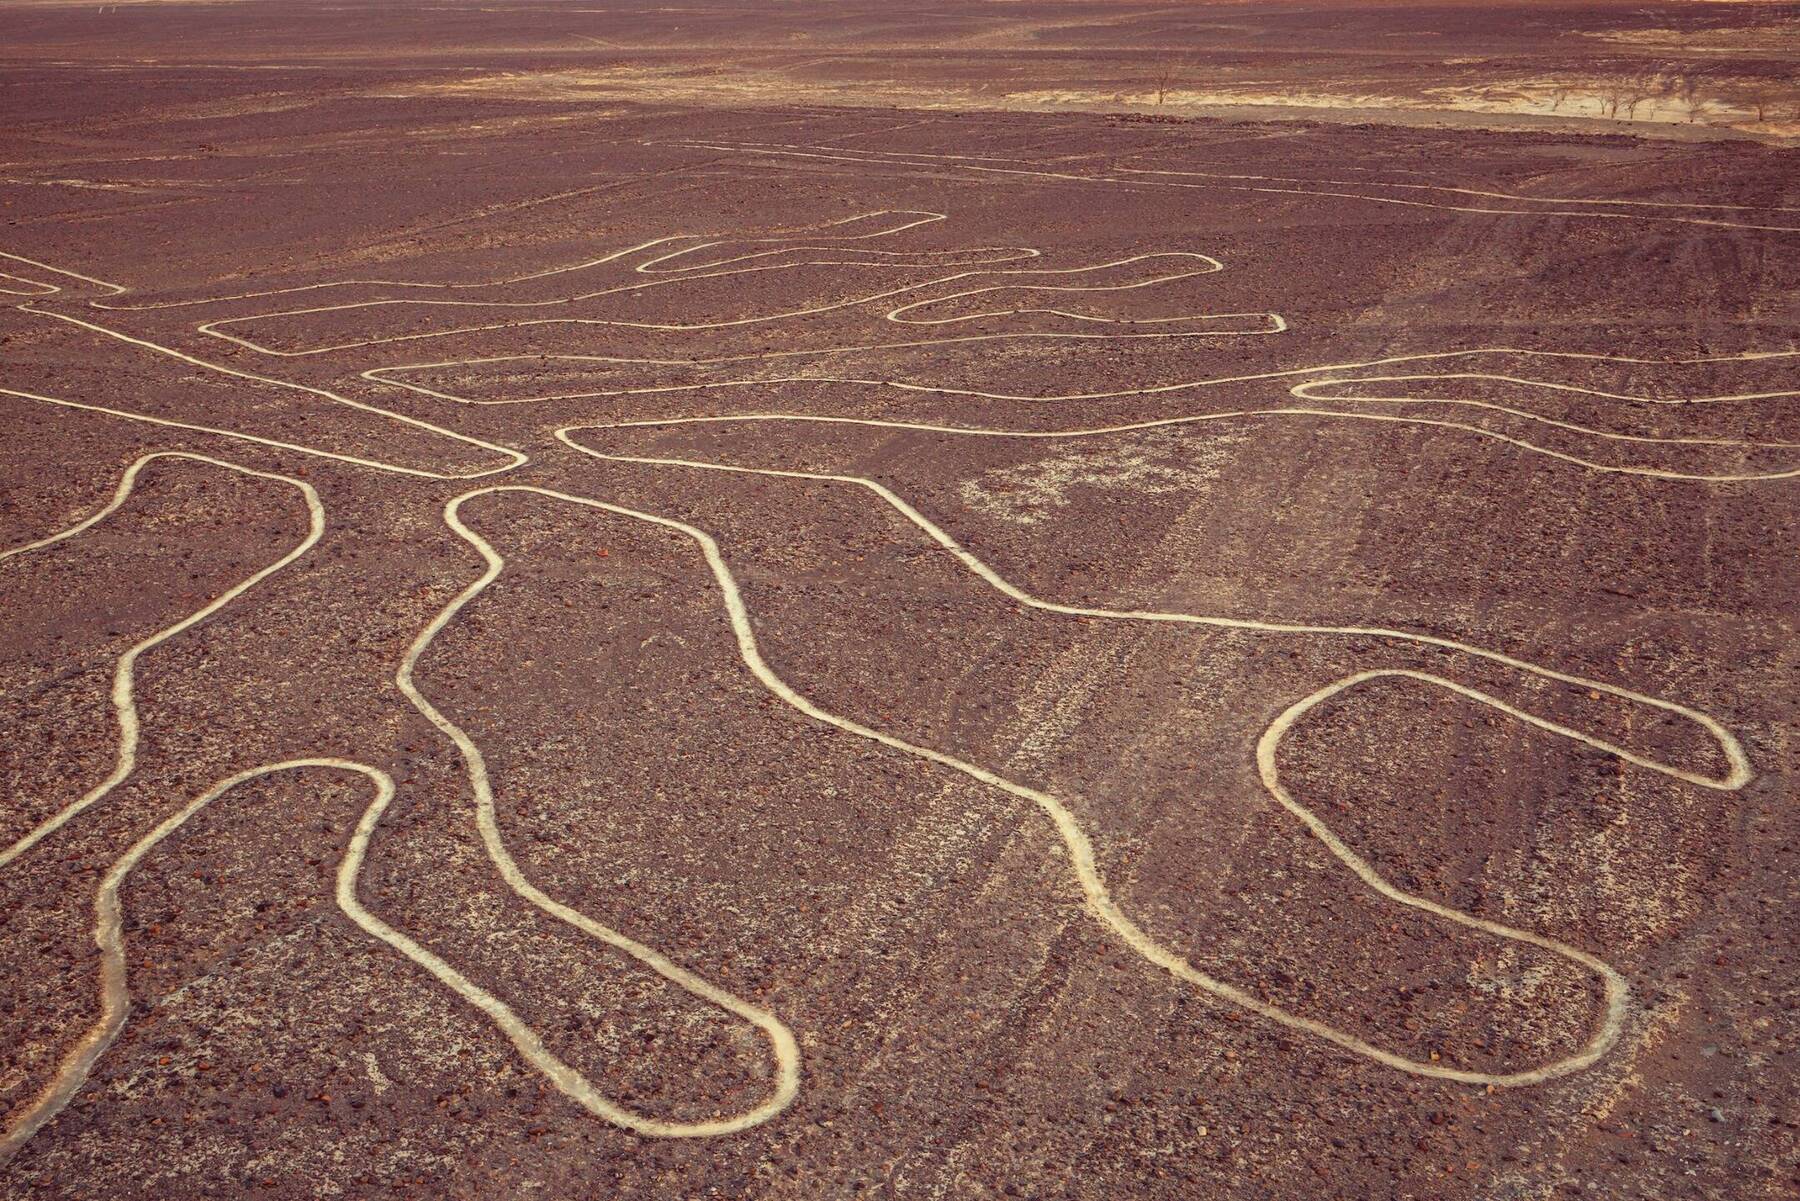 Ancient Sights of the Nazca Desert